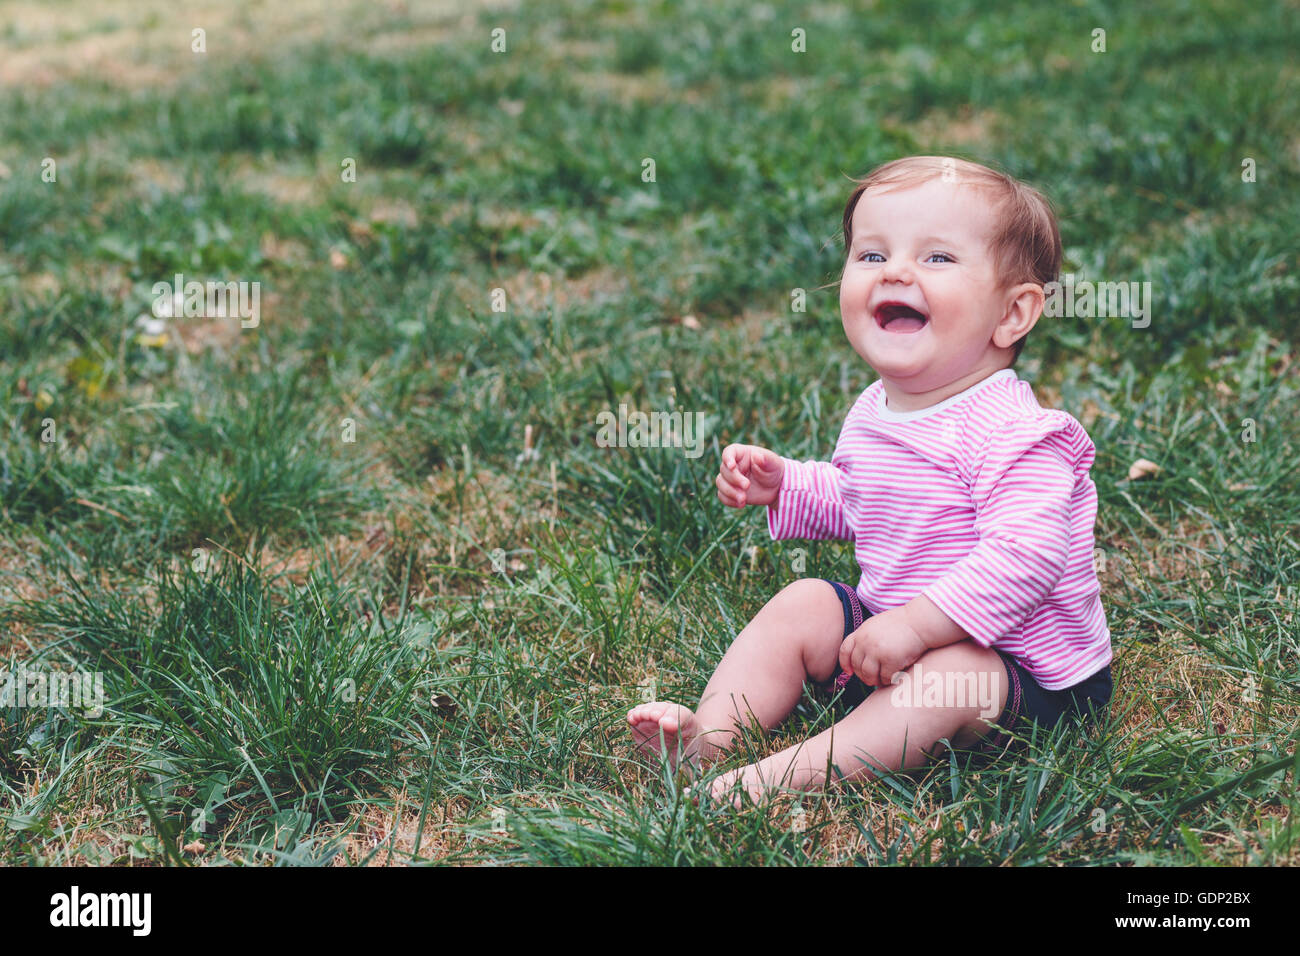 Smiling baby girl sitting on a grass in the garden Stock Photo